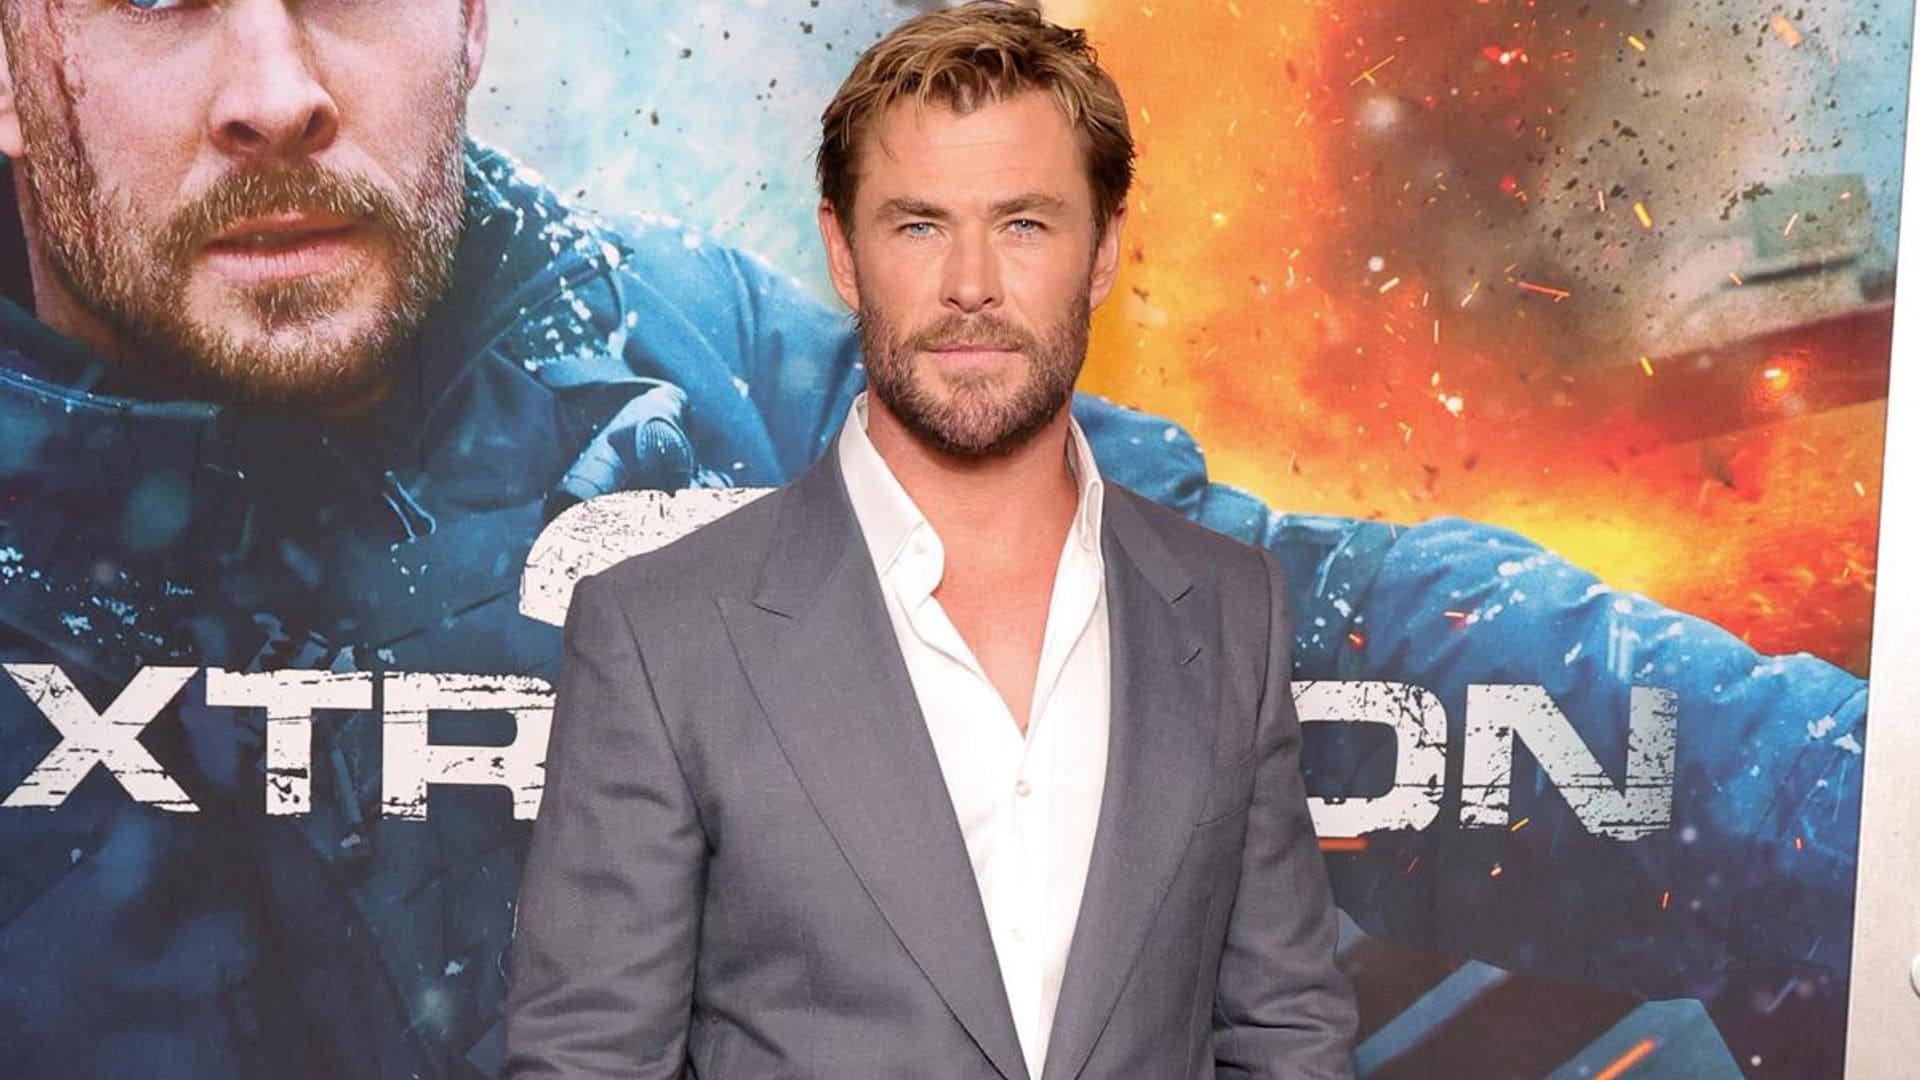 Chris Hemsworth shares adorable video of his daughter watching ‘Thor’